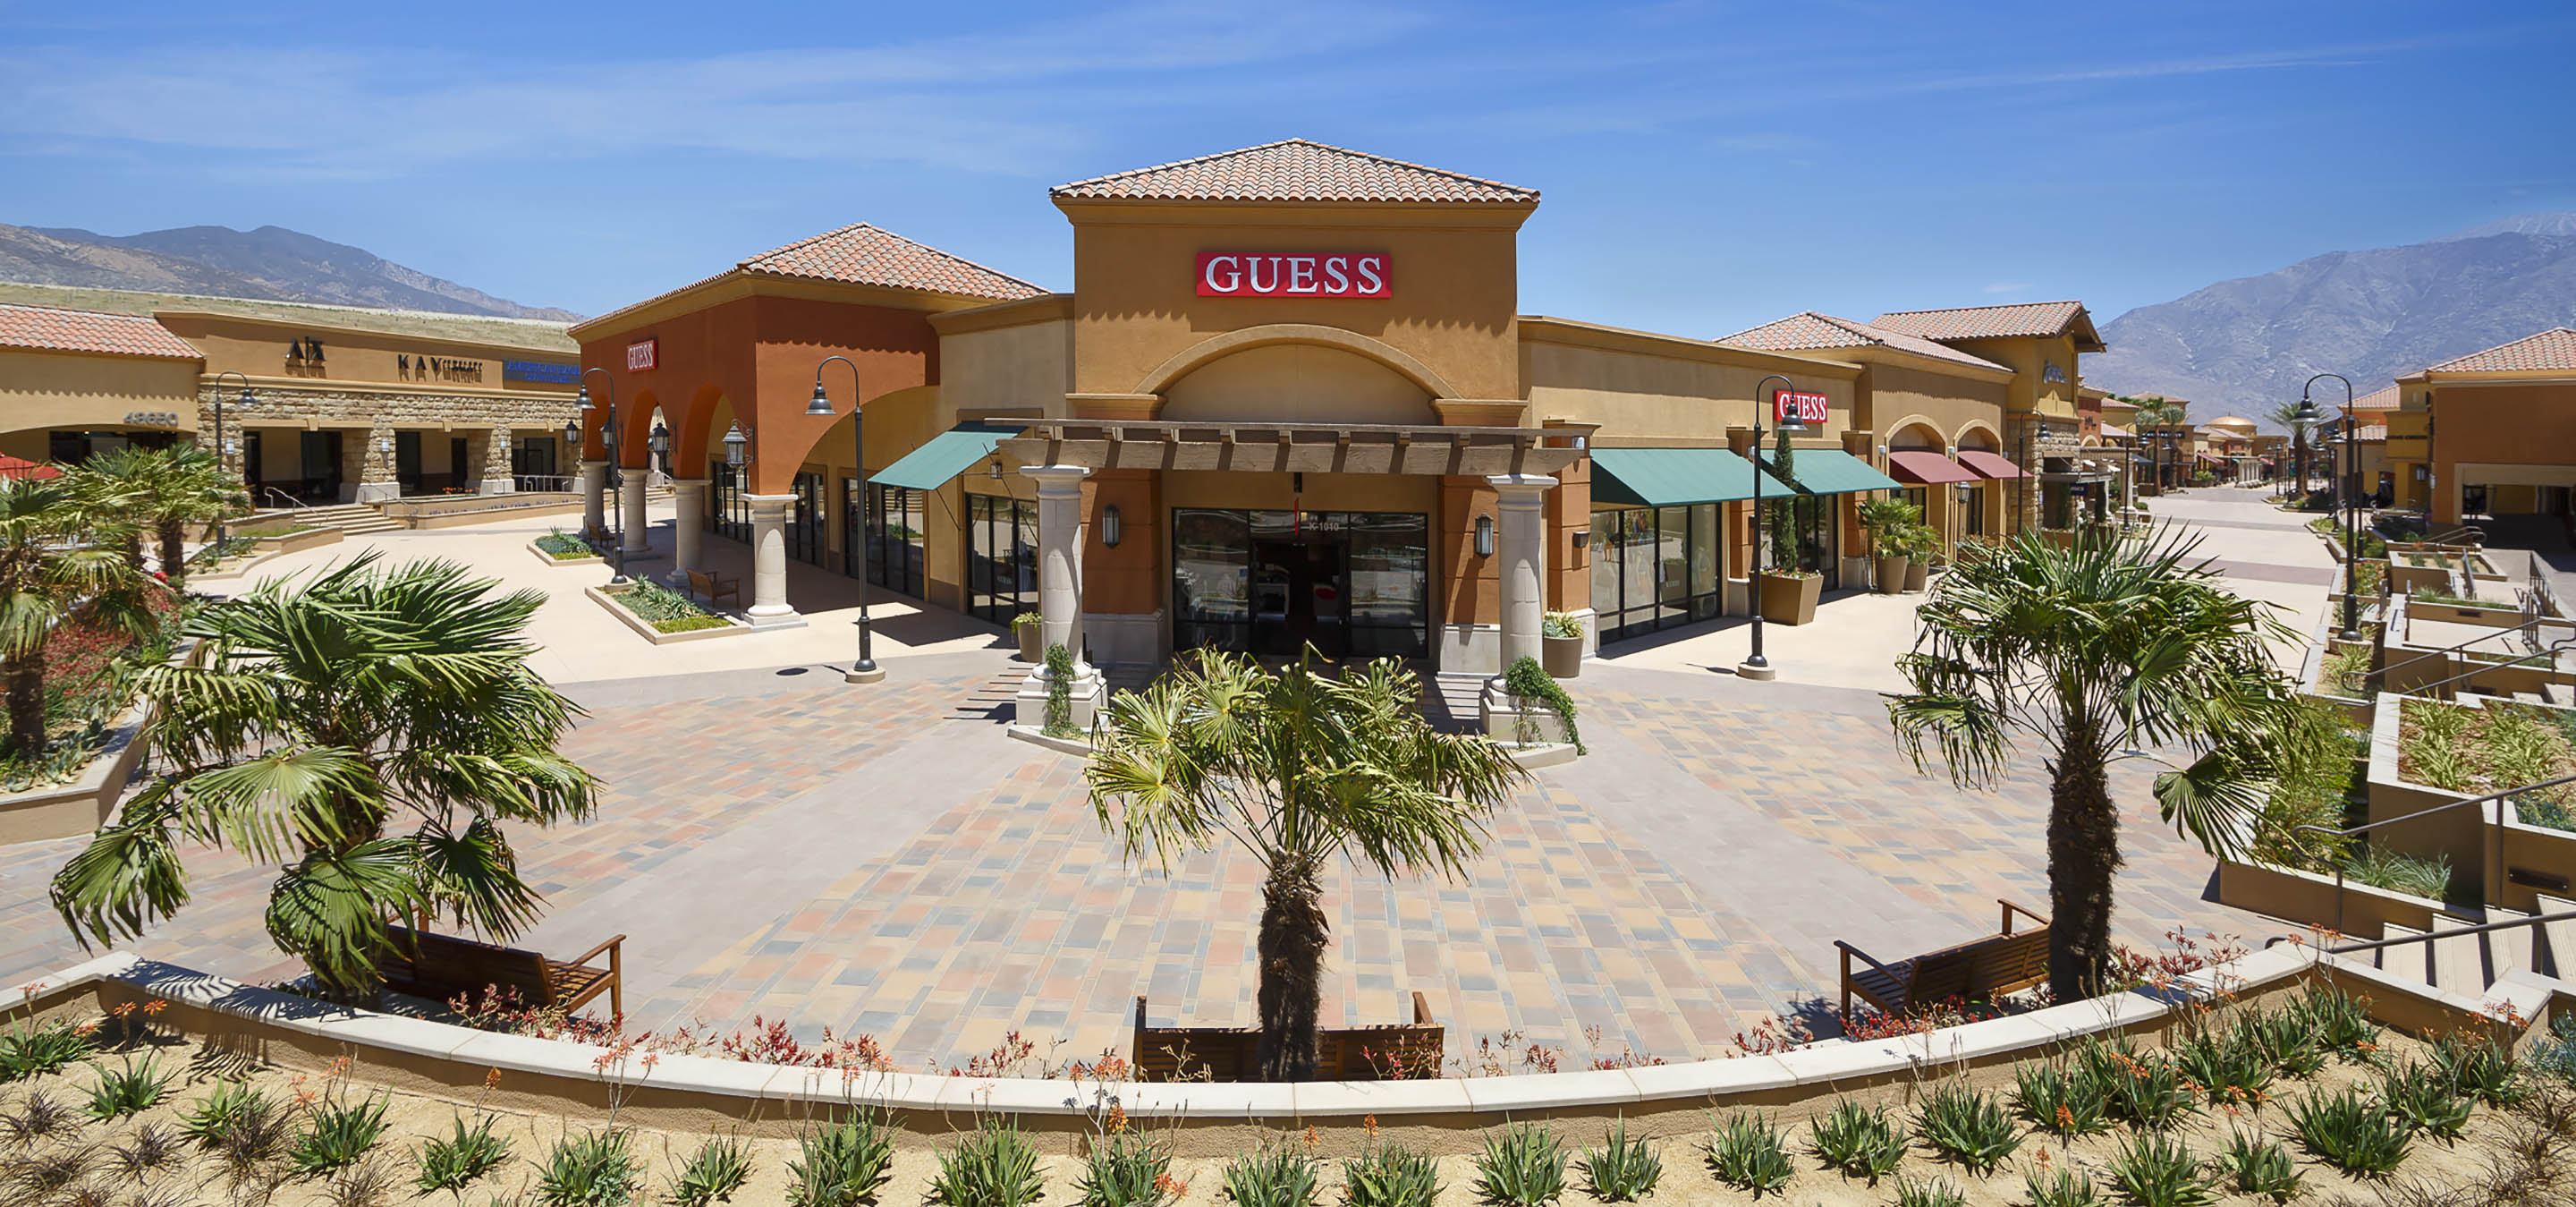 Tory Burch at Desert Hills Premium Outlets® - A Shopping Center in Cabazon,  CA - A Simon Property